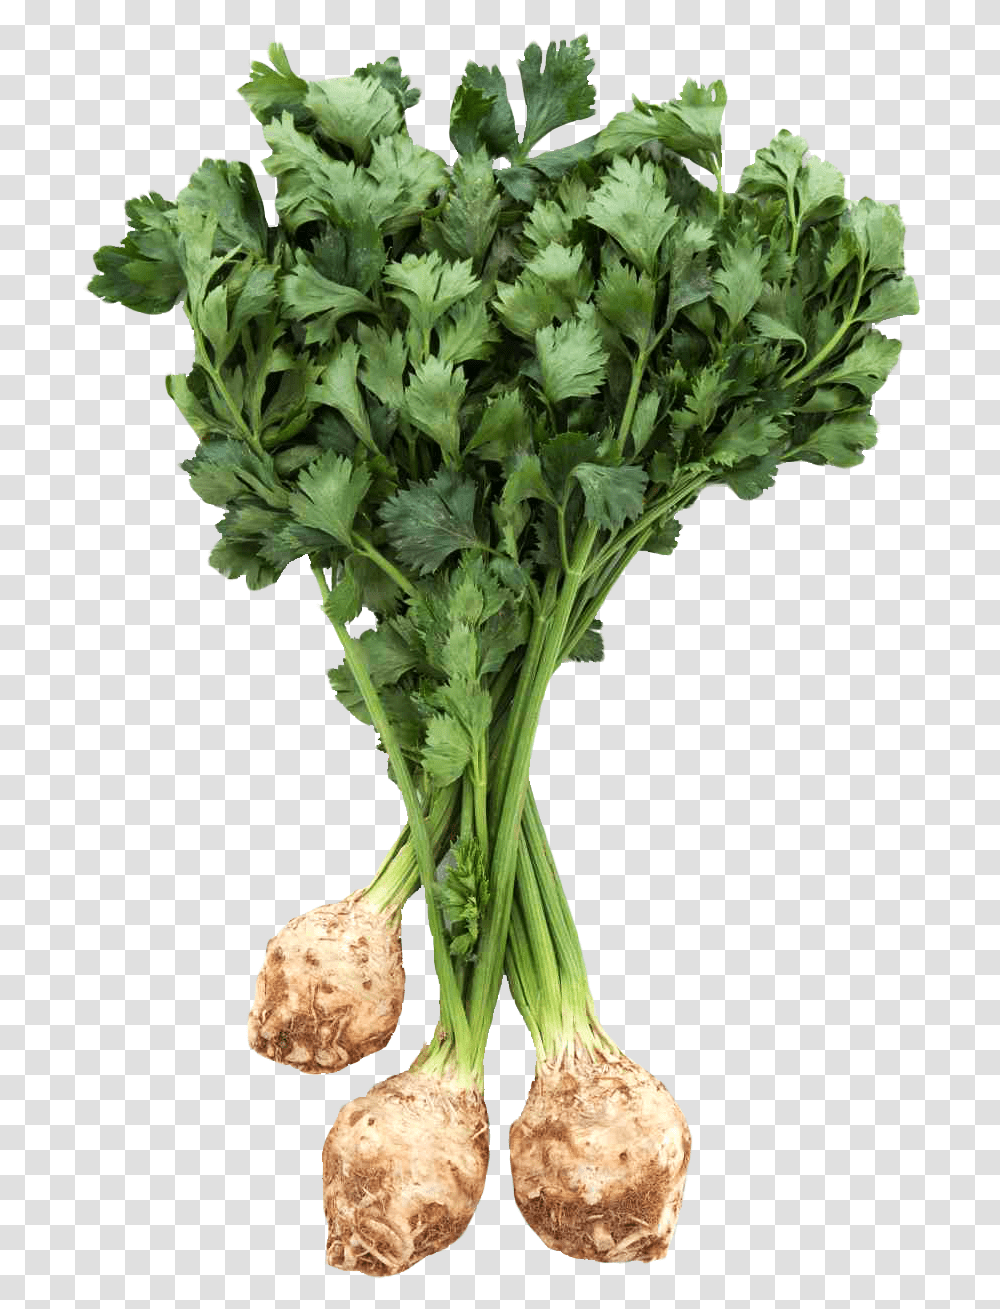 Download Fresh Celery Root With Leaves Image For Free Celery Root, Plant, Vase, Jar, Pottery Transparent Png